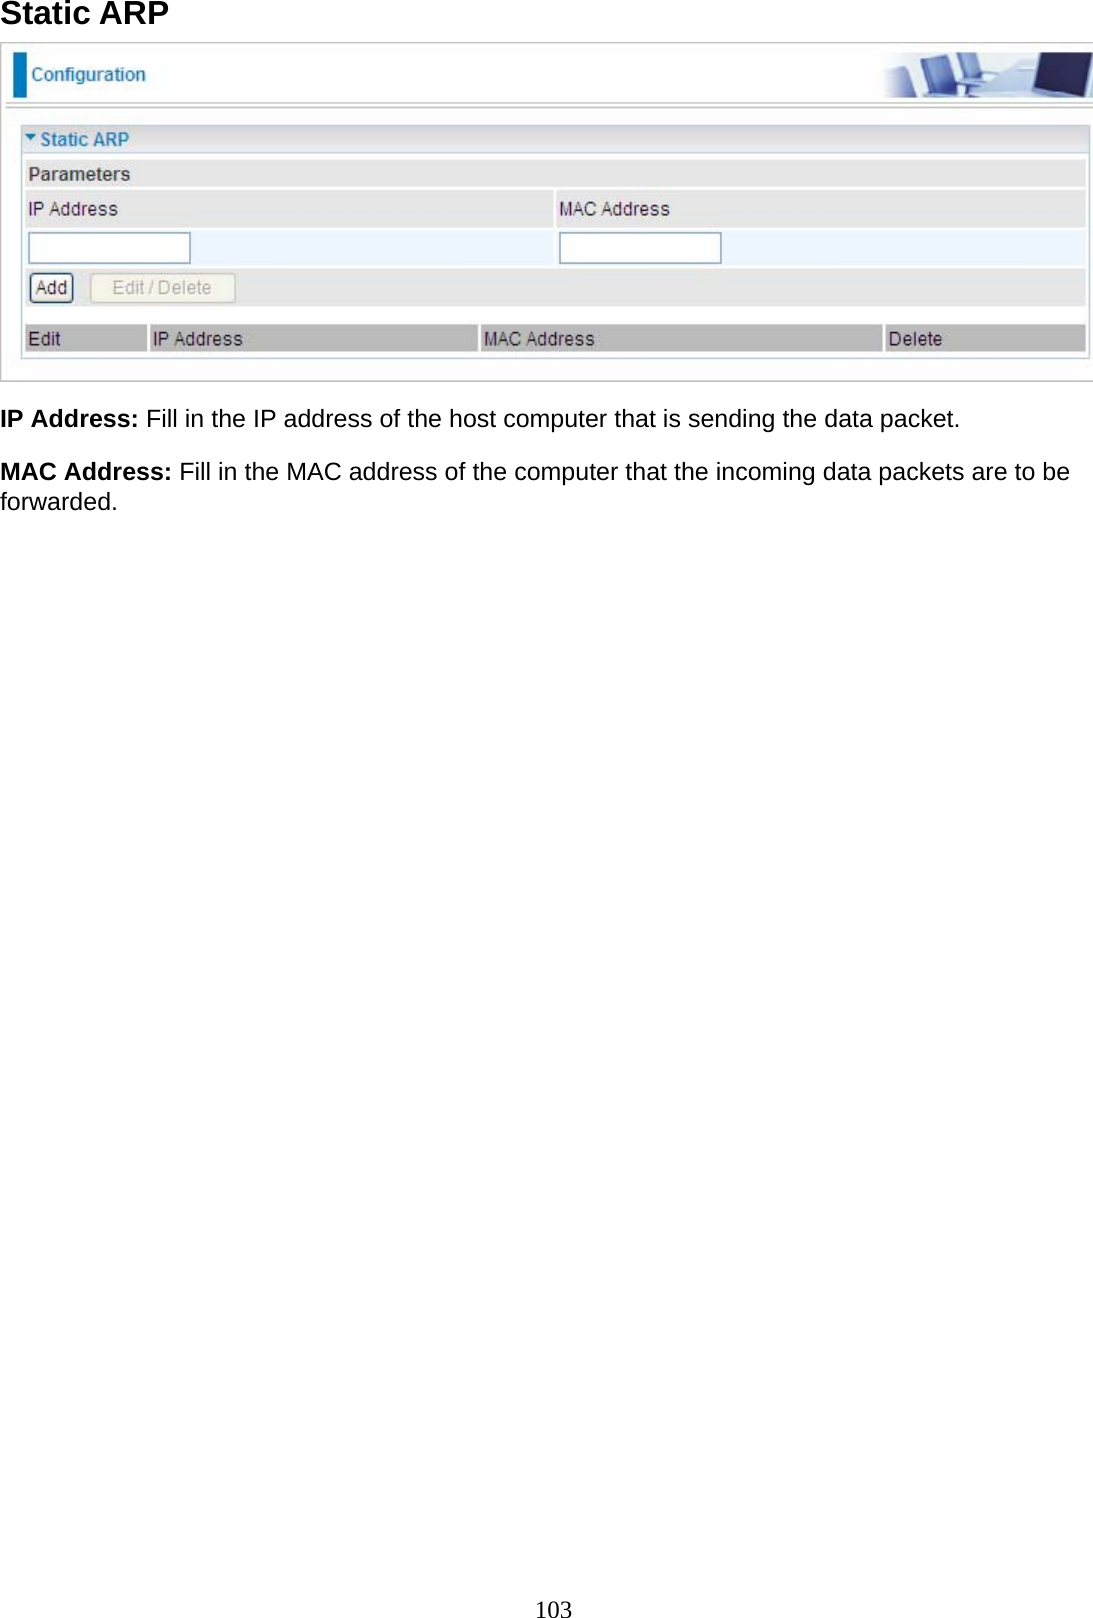 103 Static ARP    IP Address: Fill in the IP address of the host computer that is sending the data packet.  MAC Address: Fill in the MAC address of the computer that the incoming data packets are to be forwarded. 